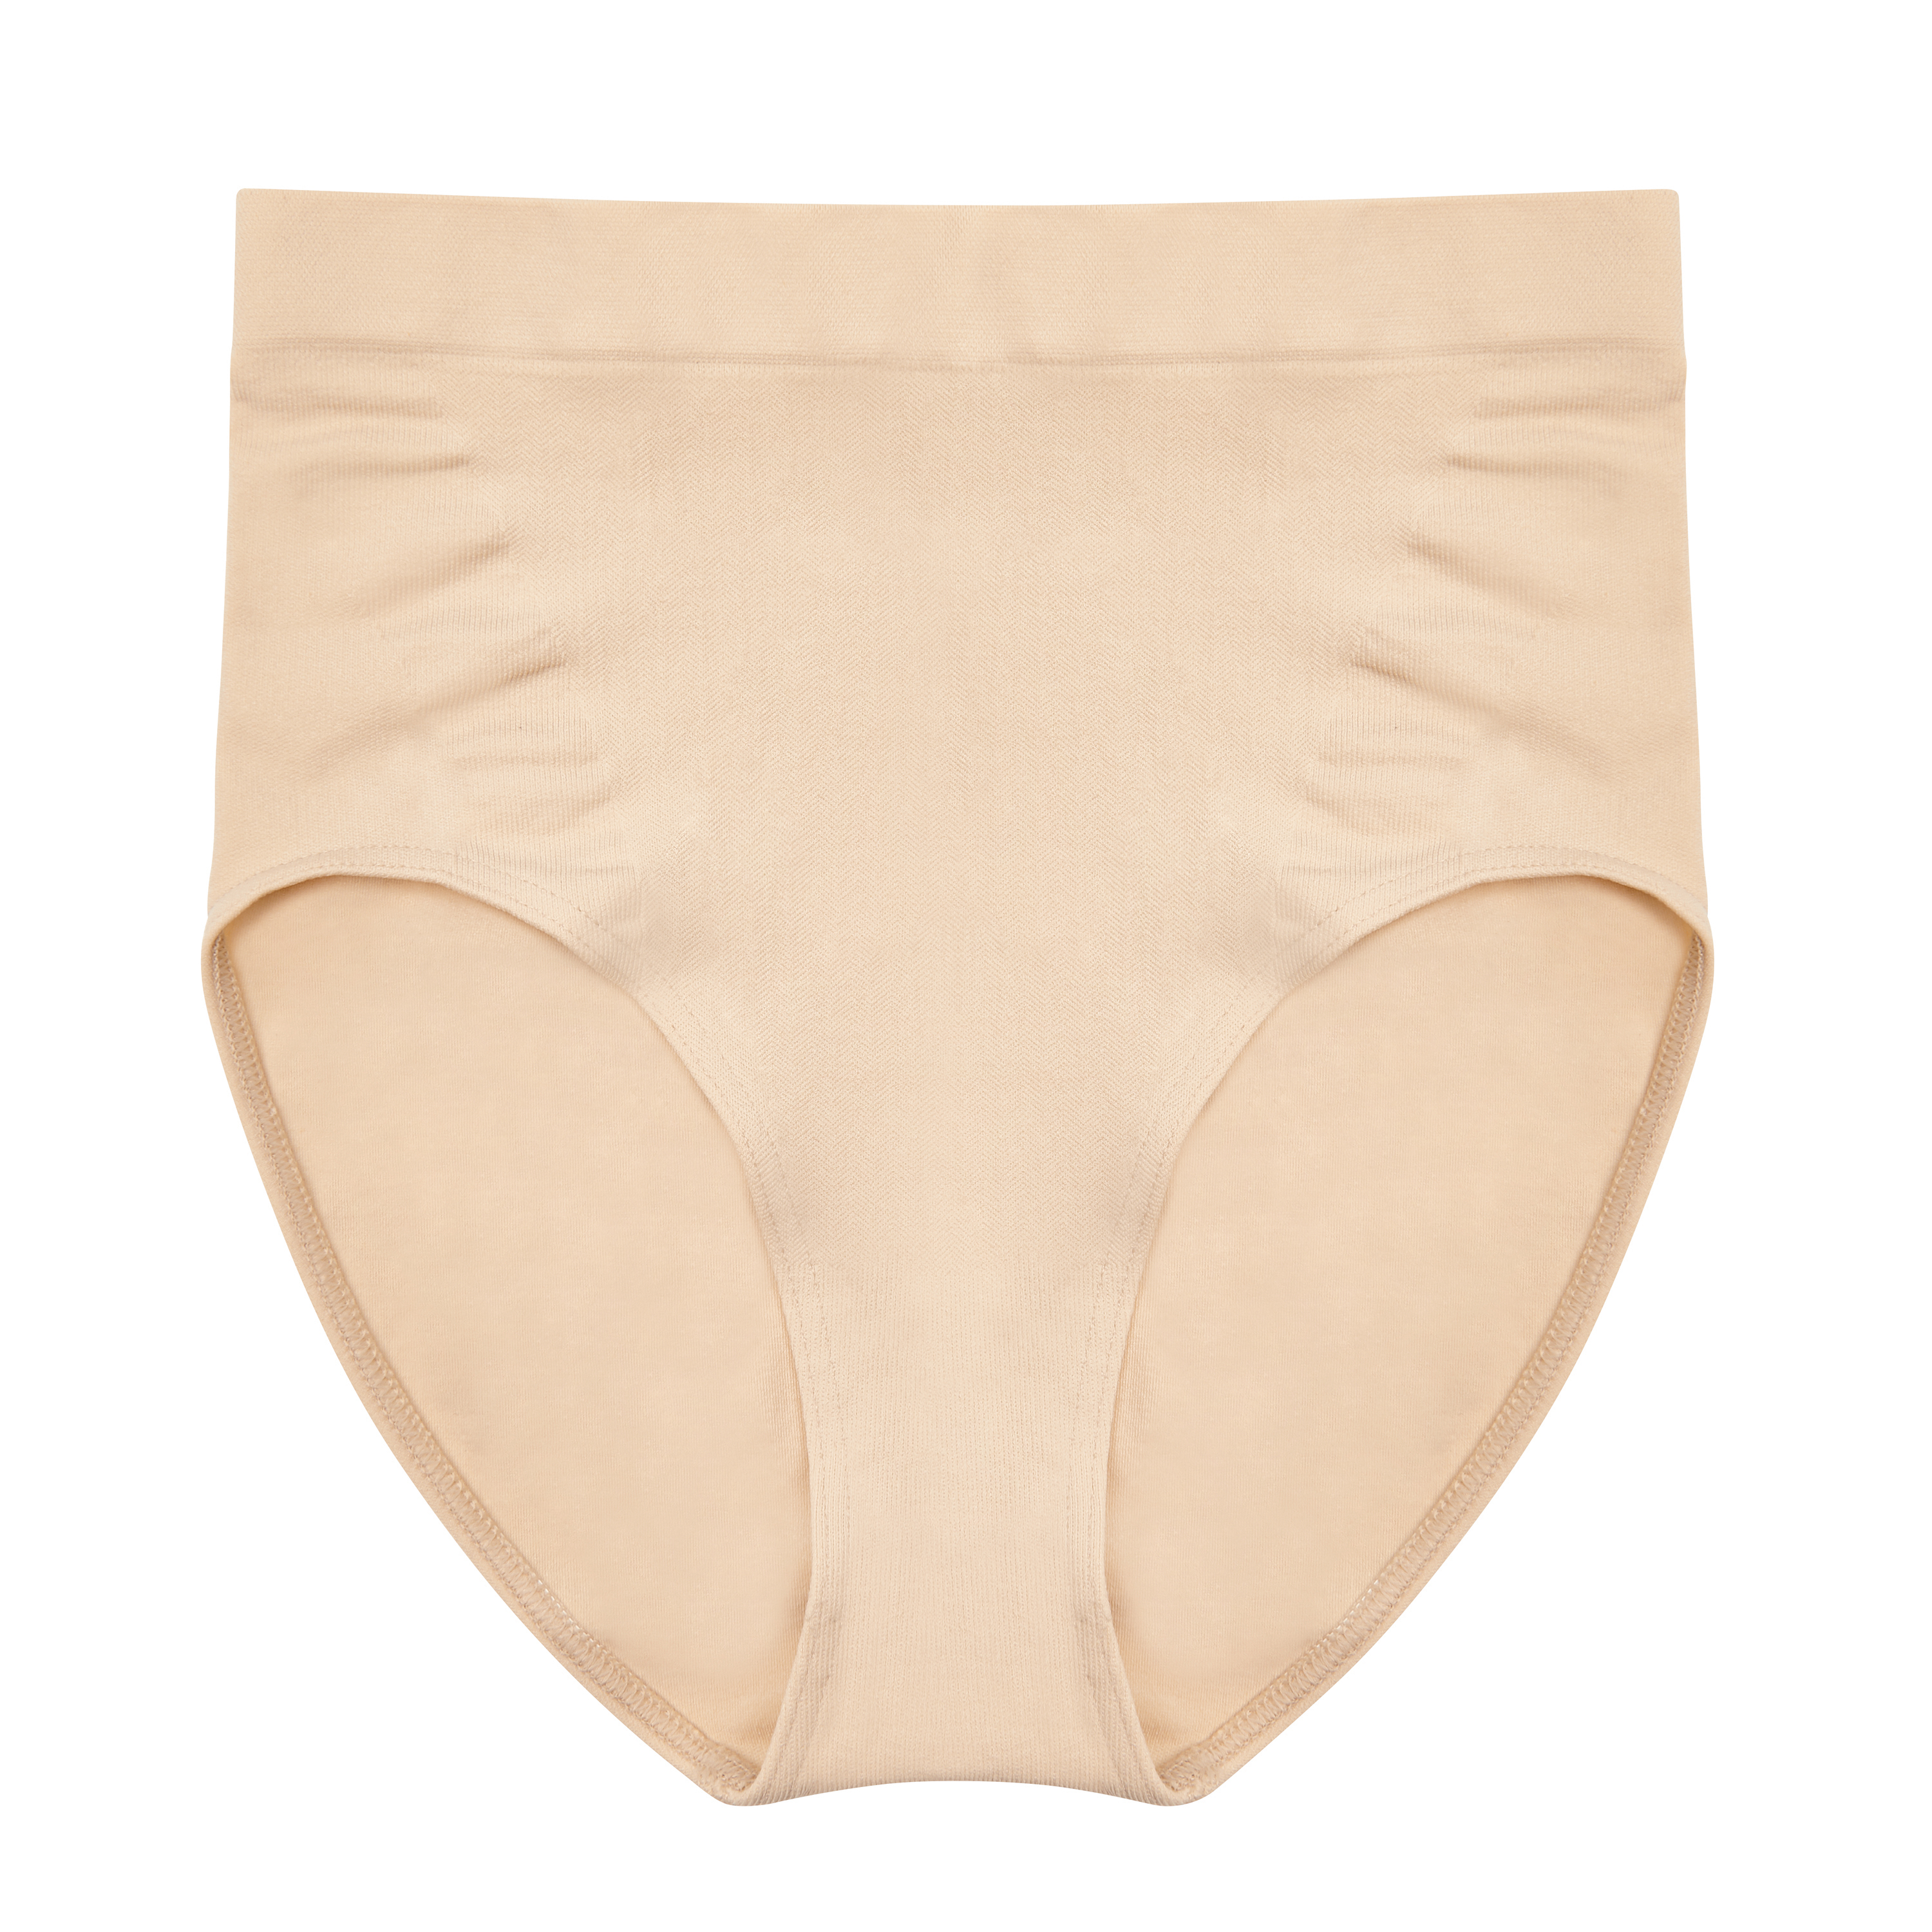 Contour Low-waist Shaping Brief